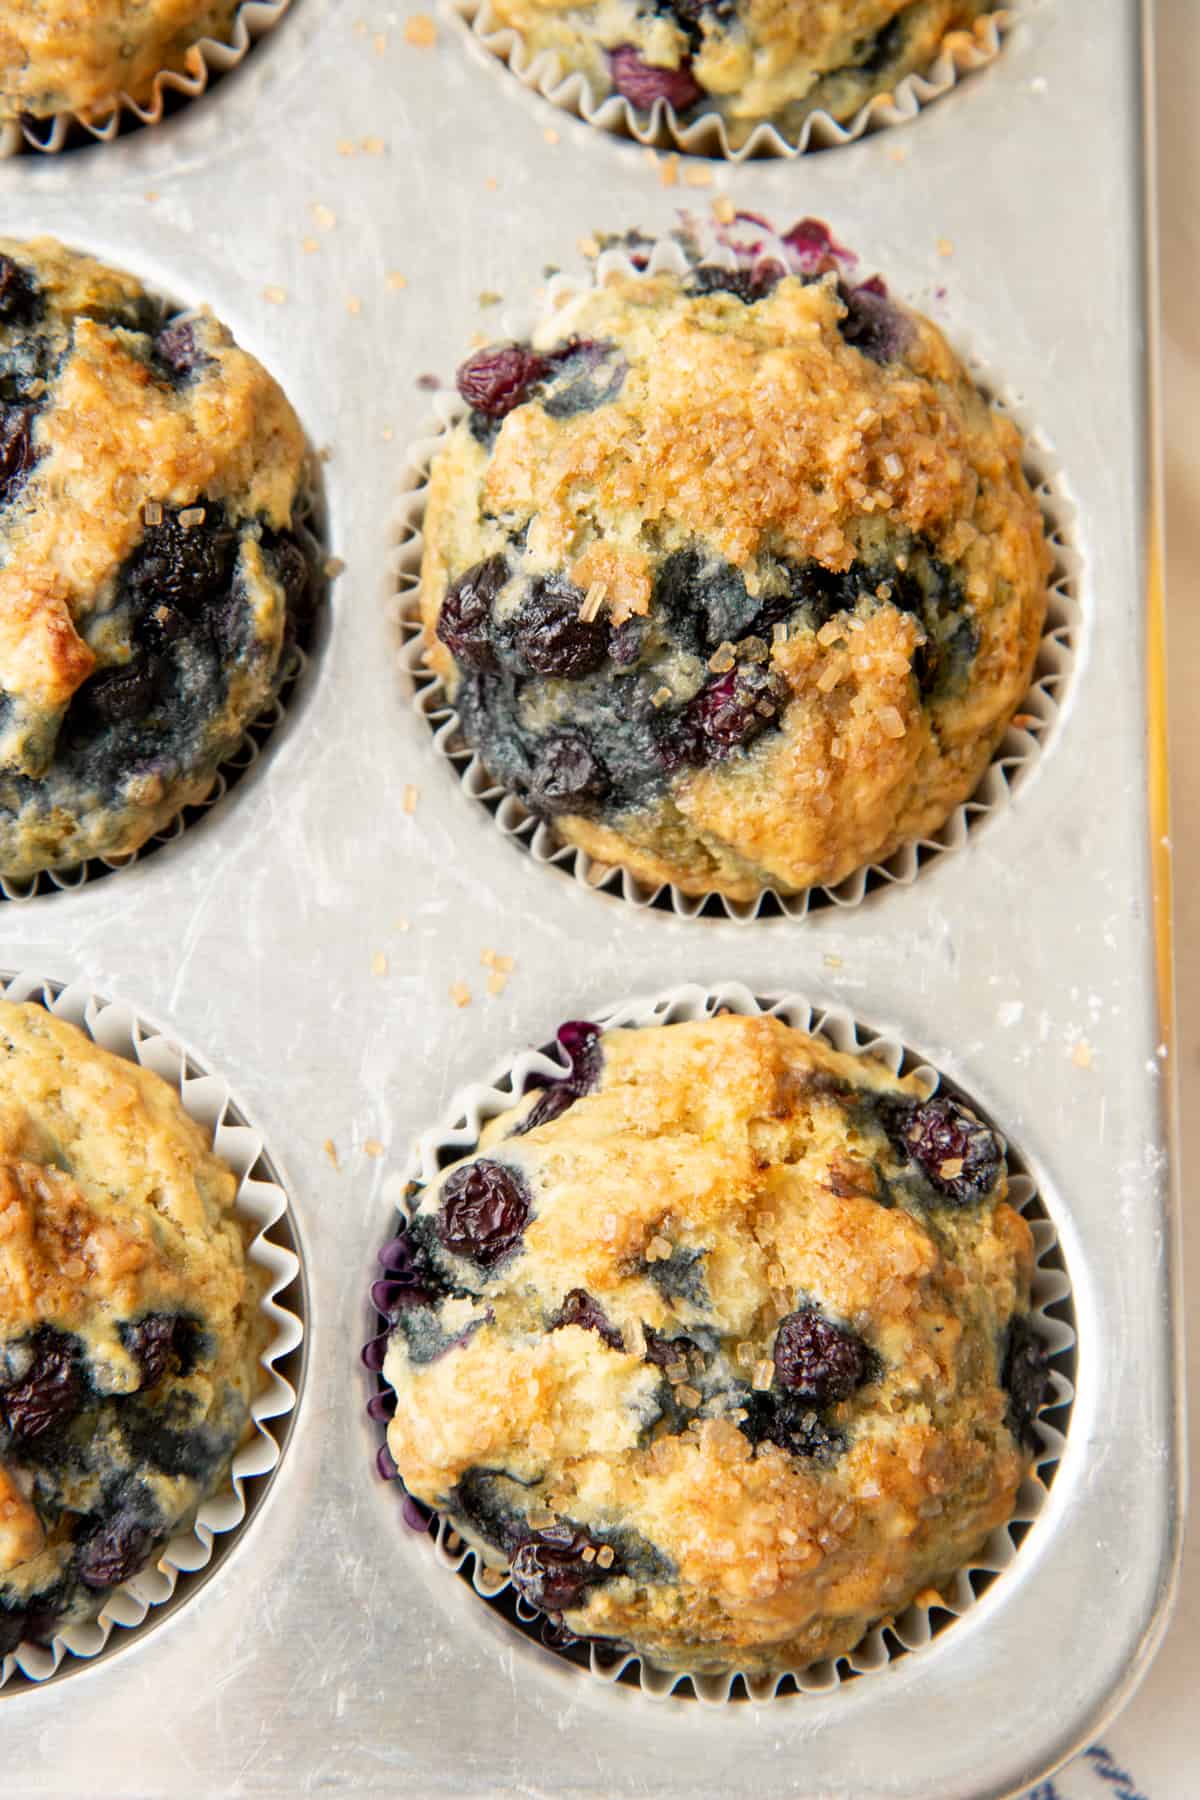 Freshly baked muffins sit in a muffin pan.